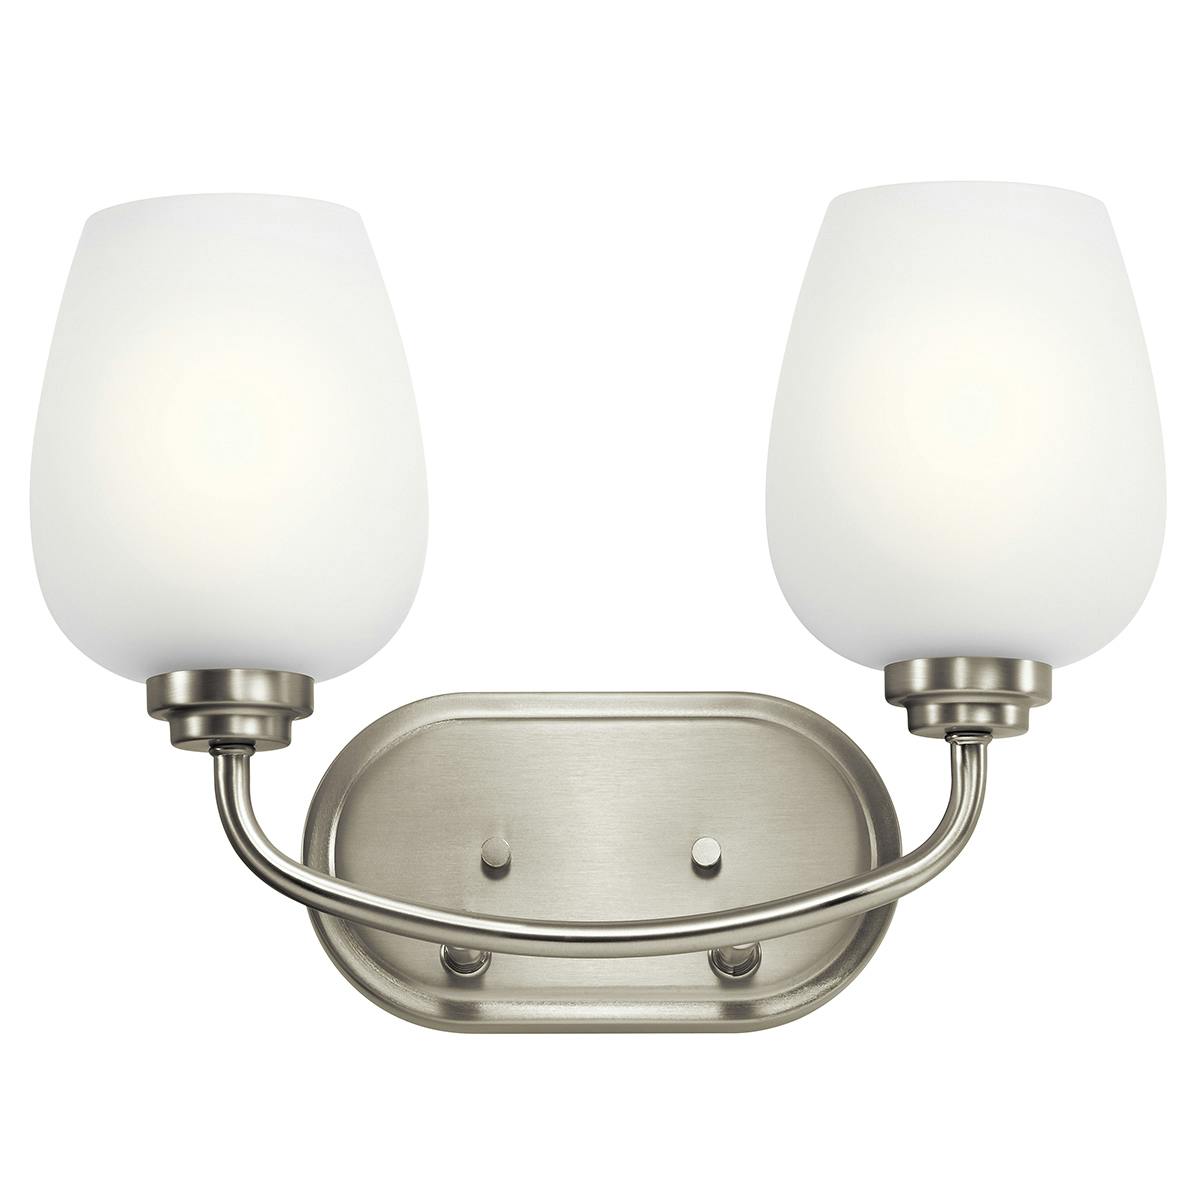 Front view of the Valserrano 2 Light Vanity Light Nickel on a white background